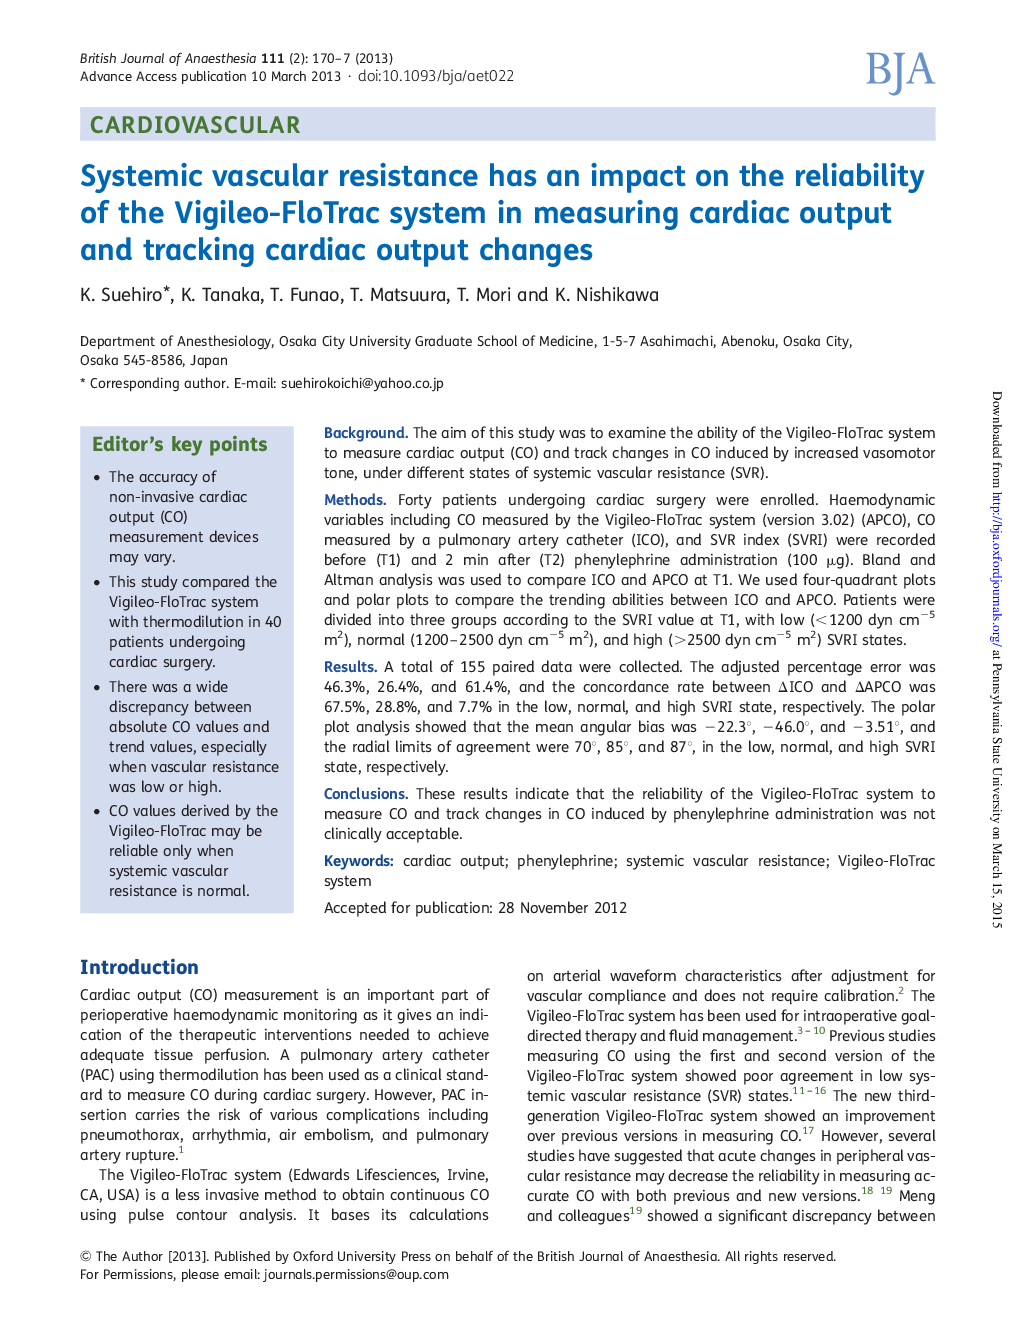 Systemic vascular resistance has an impact on the reliability of the Vigileo-FloTrac system in measuring cardiac output and tracking cardiac output changes